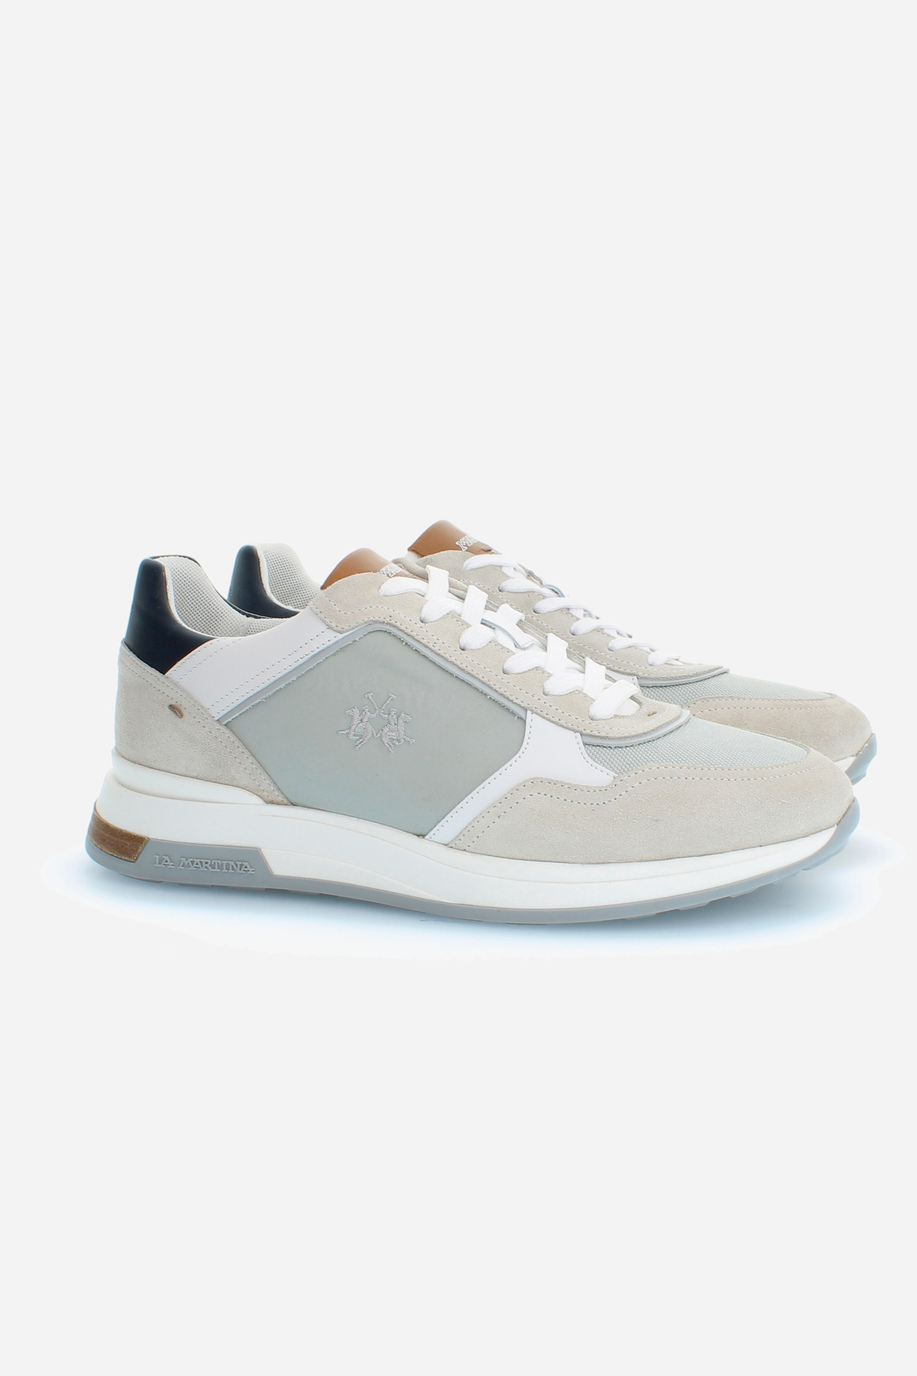 Men's trainers with raised sole in canvas and suede - Shoes and Accessories | La Martina - Official Online Shop